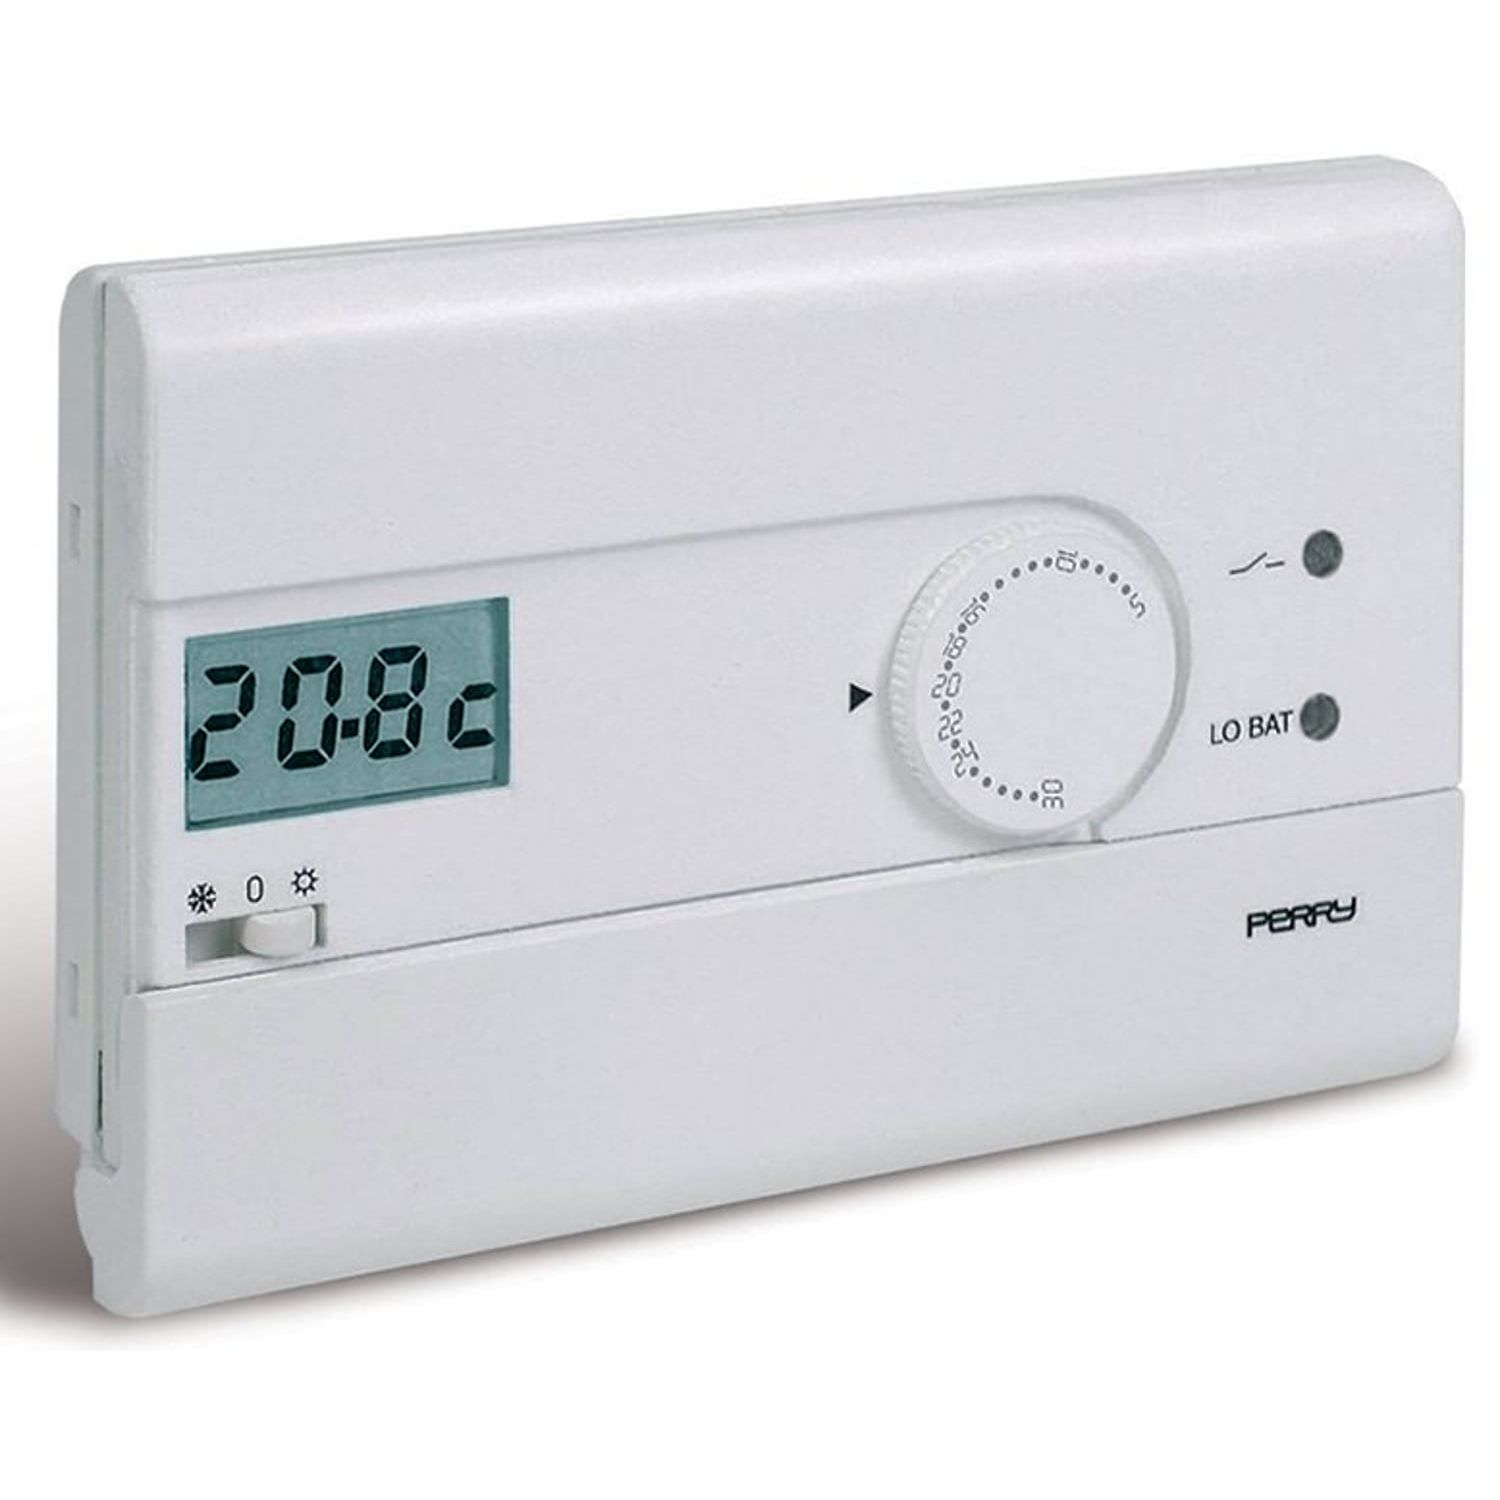 Digital Wall Thermostat White